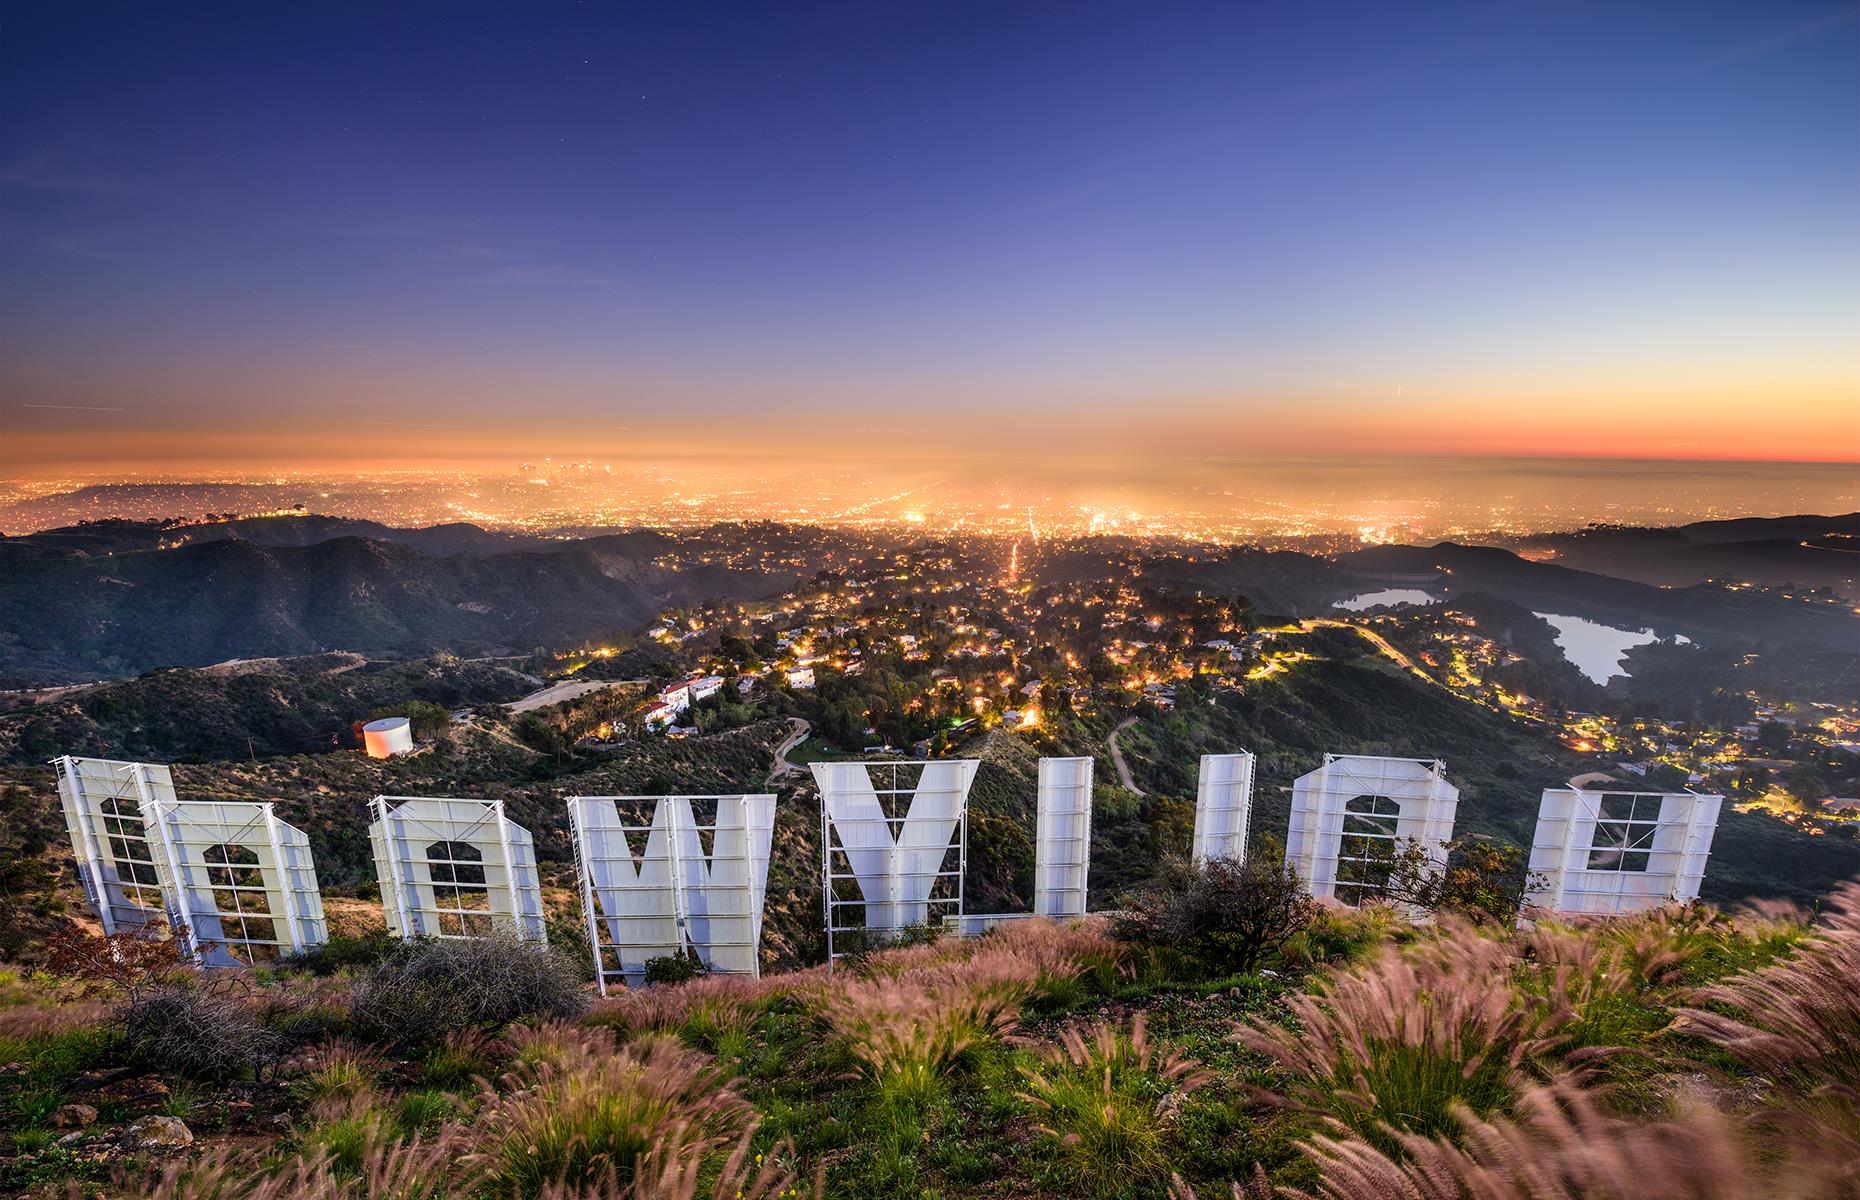 <p>Get some perspective on celebrity culture with a bracing 6.5-mile (10.4km) hike to see the famous Hollywood sign up close. The huge aluminum letters stand proud just below the 1,708-foot (520.6m) summit of Mt Lee, part of the Santa Monica Mountains. Passing through Griffith Park, you’ll see familiar scenes from movies such as <em>Rebel Without a Cause</em> and <em>La La Land</em> and then gaze down on the chaotic sprawl of the City of Angels.</p>  <p><a href="https://www.loveexploring.com/guides/88050/where-to-go-in-los-angeles-hollywood-beverly-hills-silver-lake-venice-beach"><strong>You'll need t</strong></a><strong><a href="https://www.loveexploring.com/guides/88050/where-to-go-in-los-angeles-hollywood-beverly-hills-silver-lake-venice-beach">his handy guide to LA's neighborhoods</a></strong><a href="https://www.loveexploring.com/guides/88050/where-to-go-in-los-angeles-hollywood-beverly-hills-silver-lake-venice-beach"><strong> if you're planning a visit</strong></a></p>